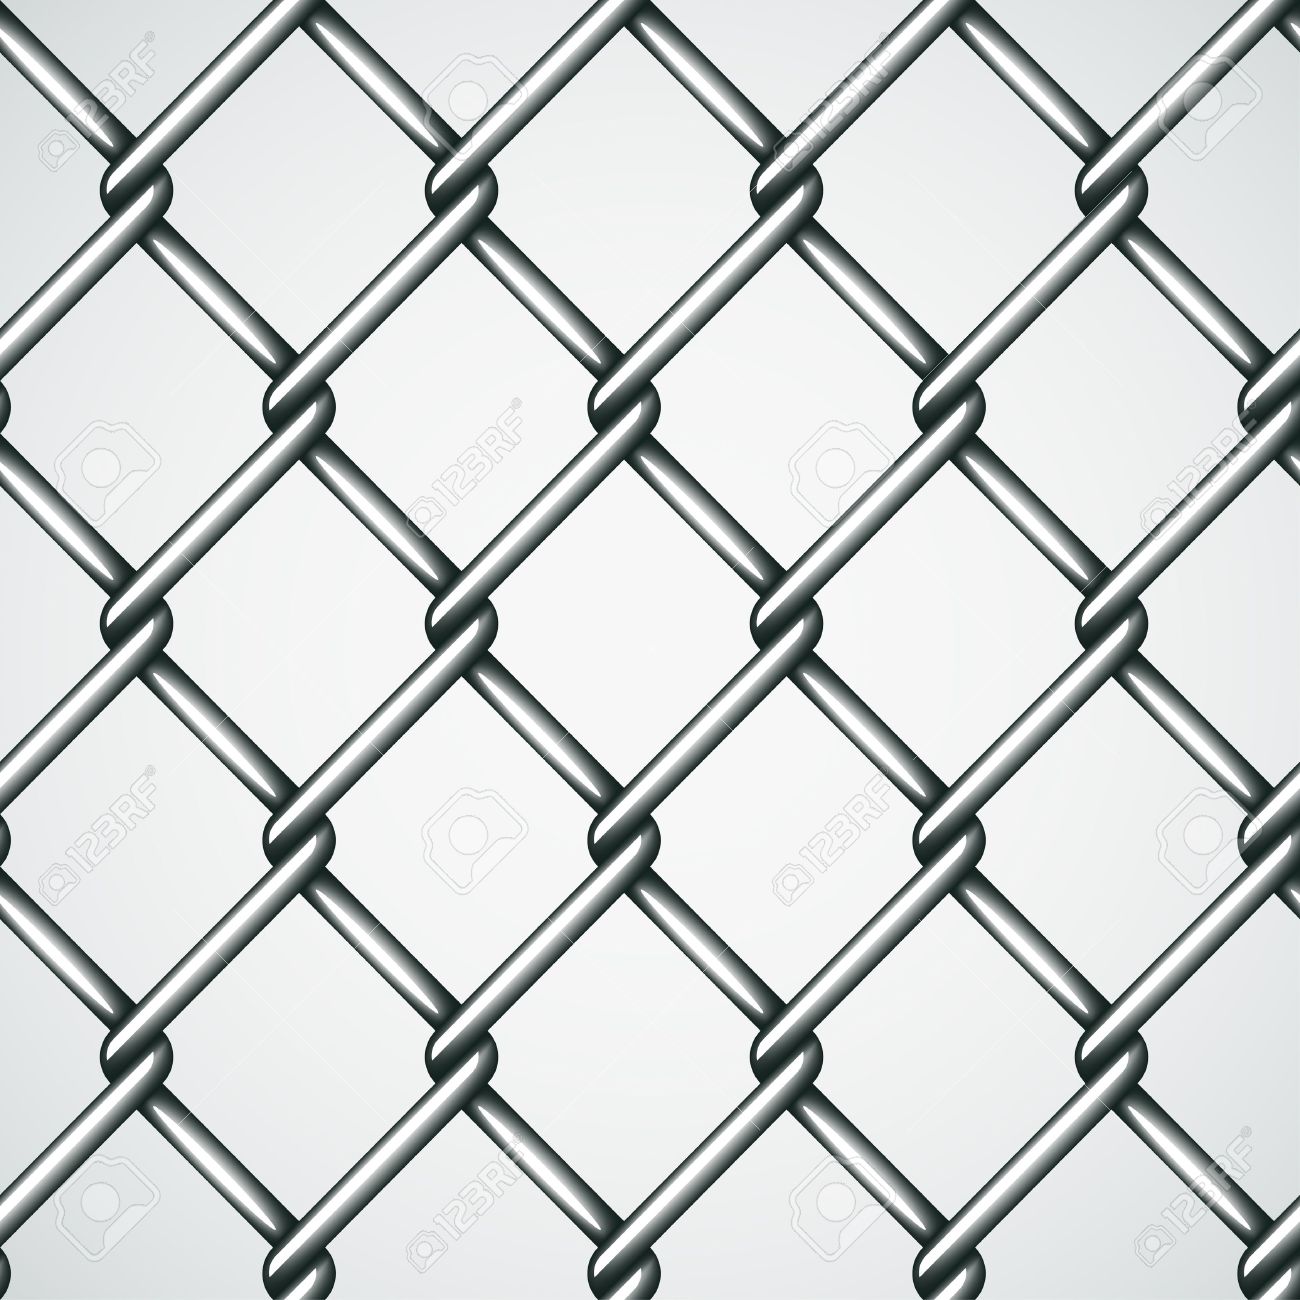 chain link fence clipart Clip Art Library